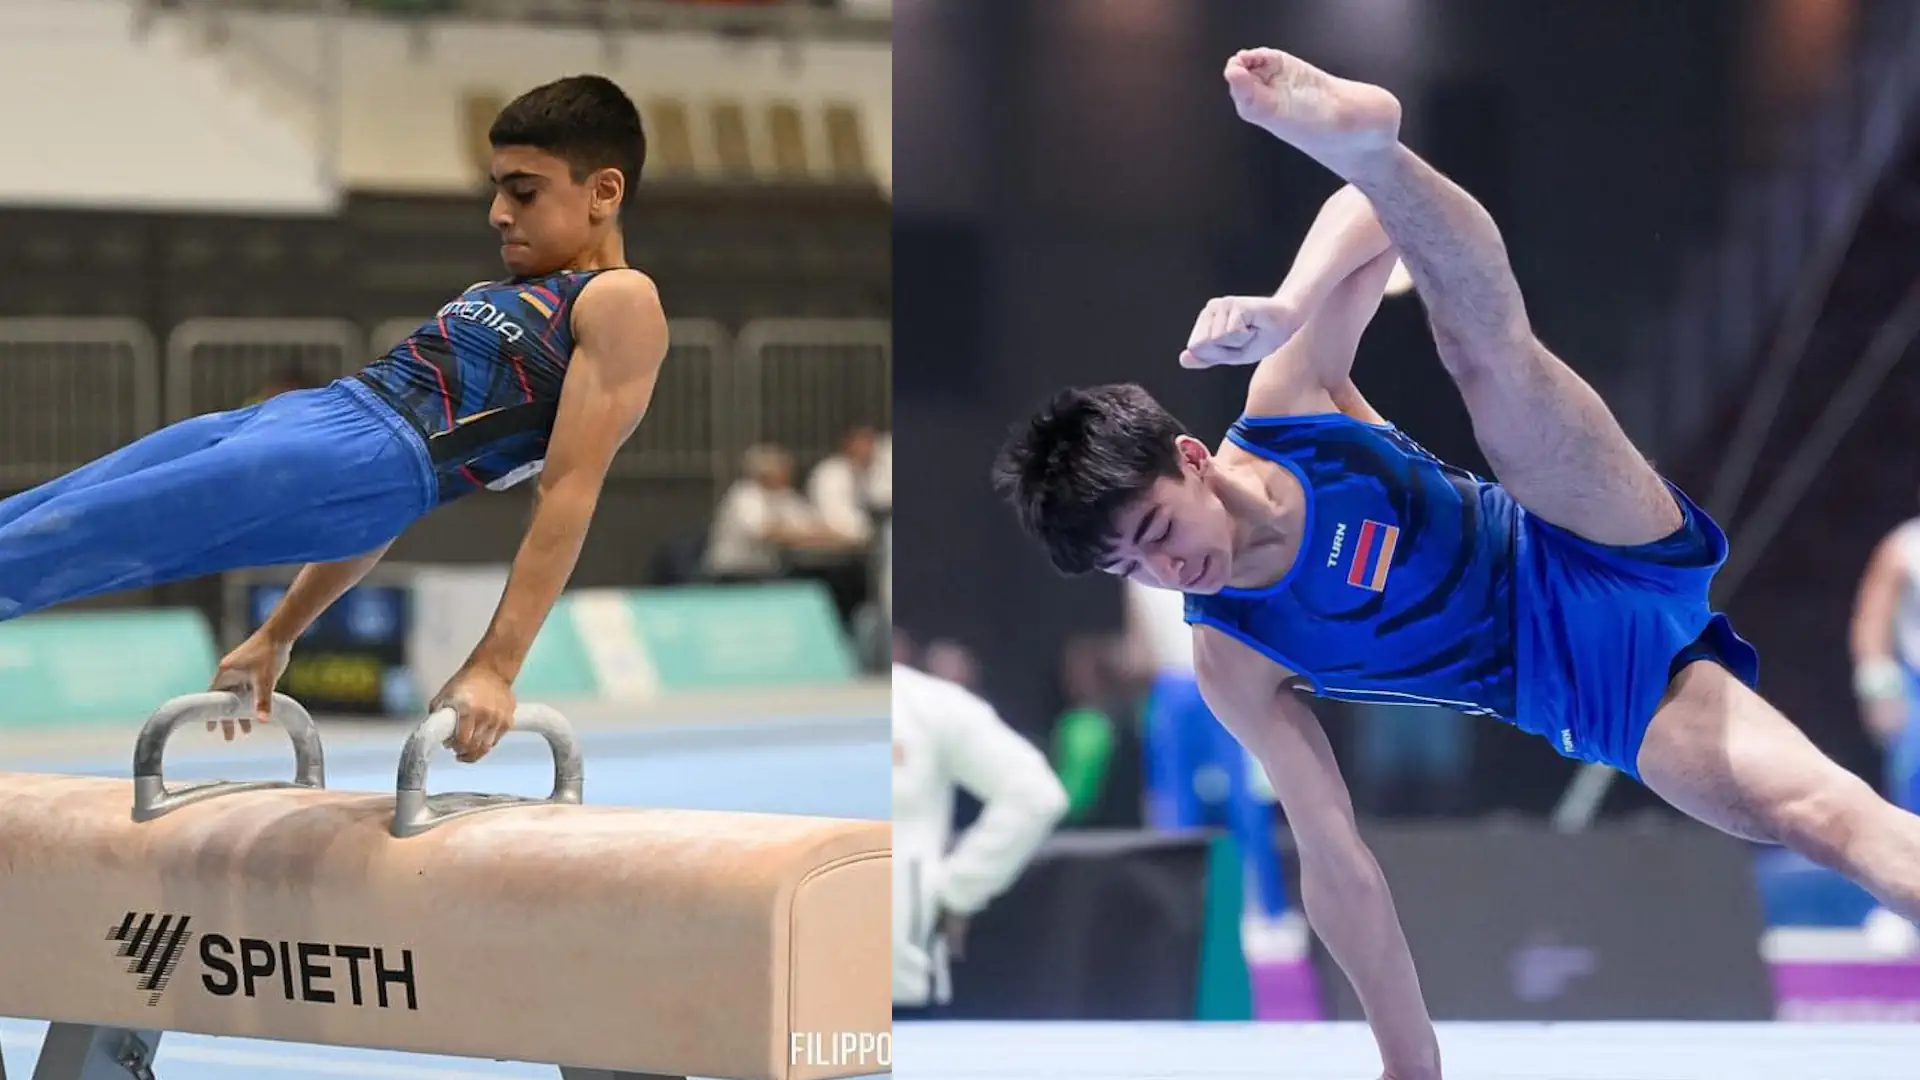 Manukyan and Khachatryan qualified for the final of the Youth Gymnastics World Championships